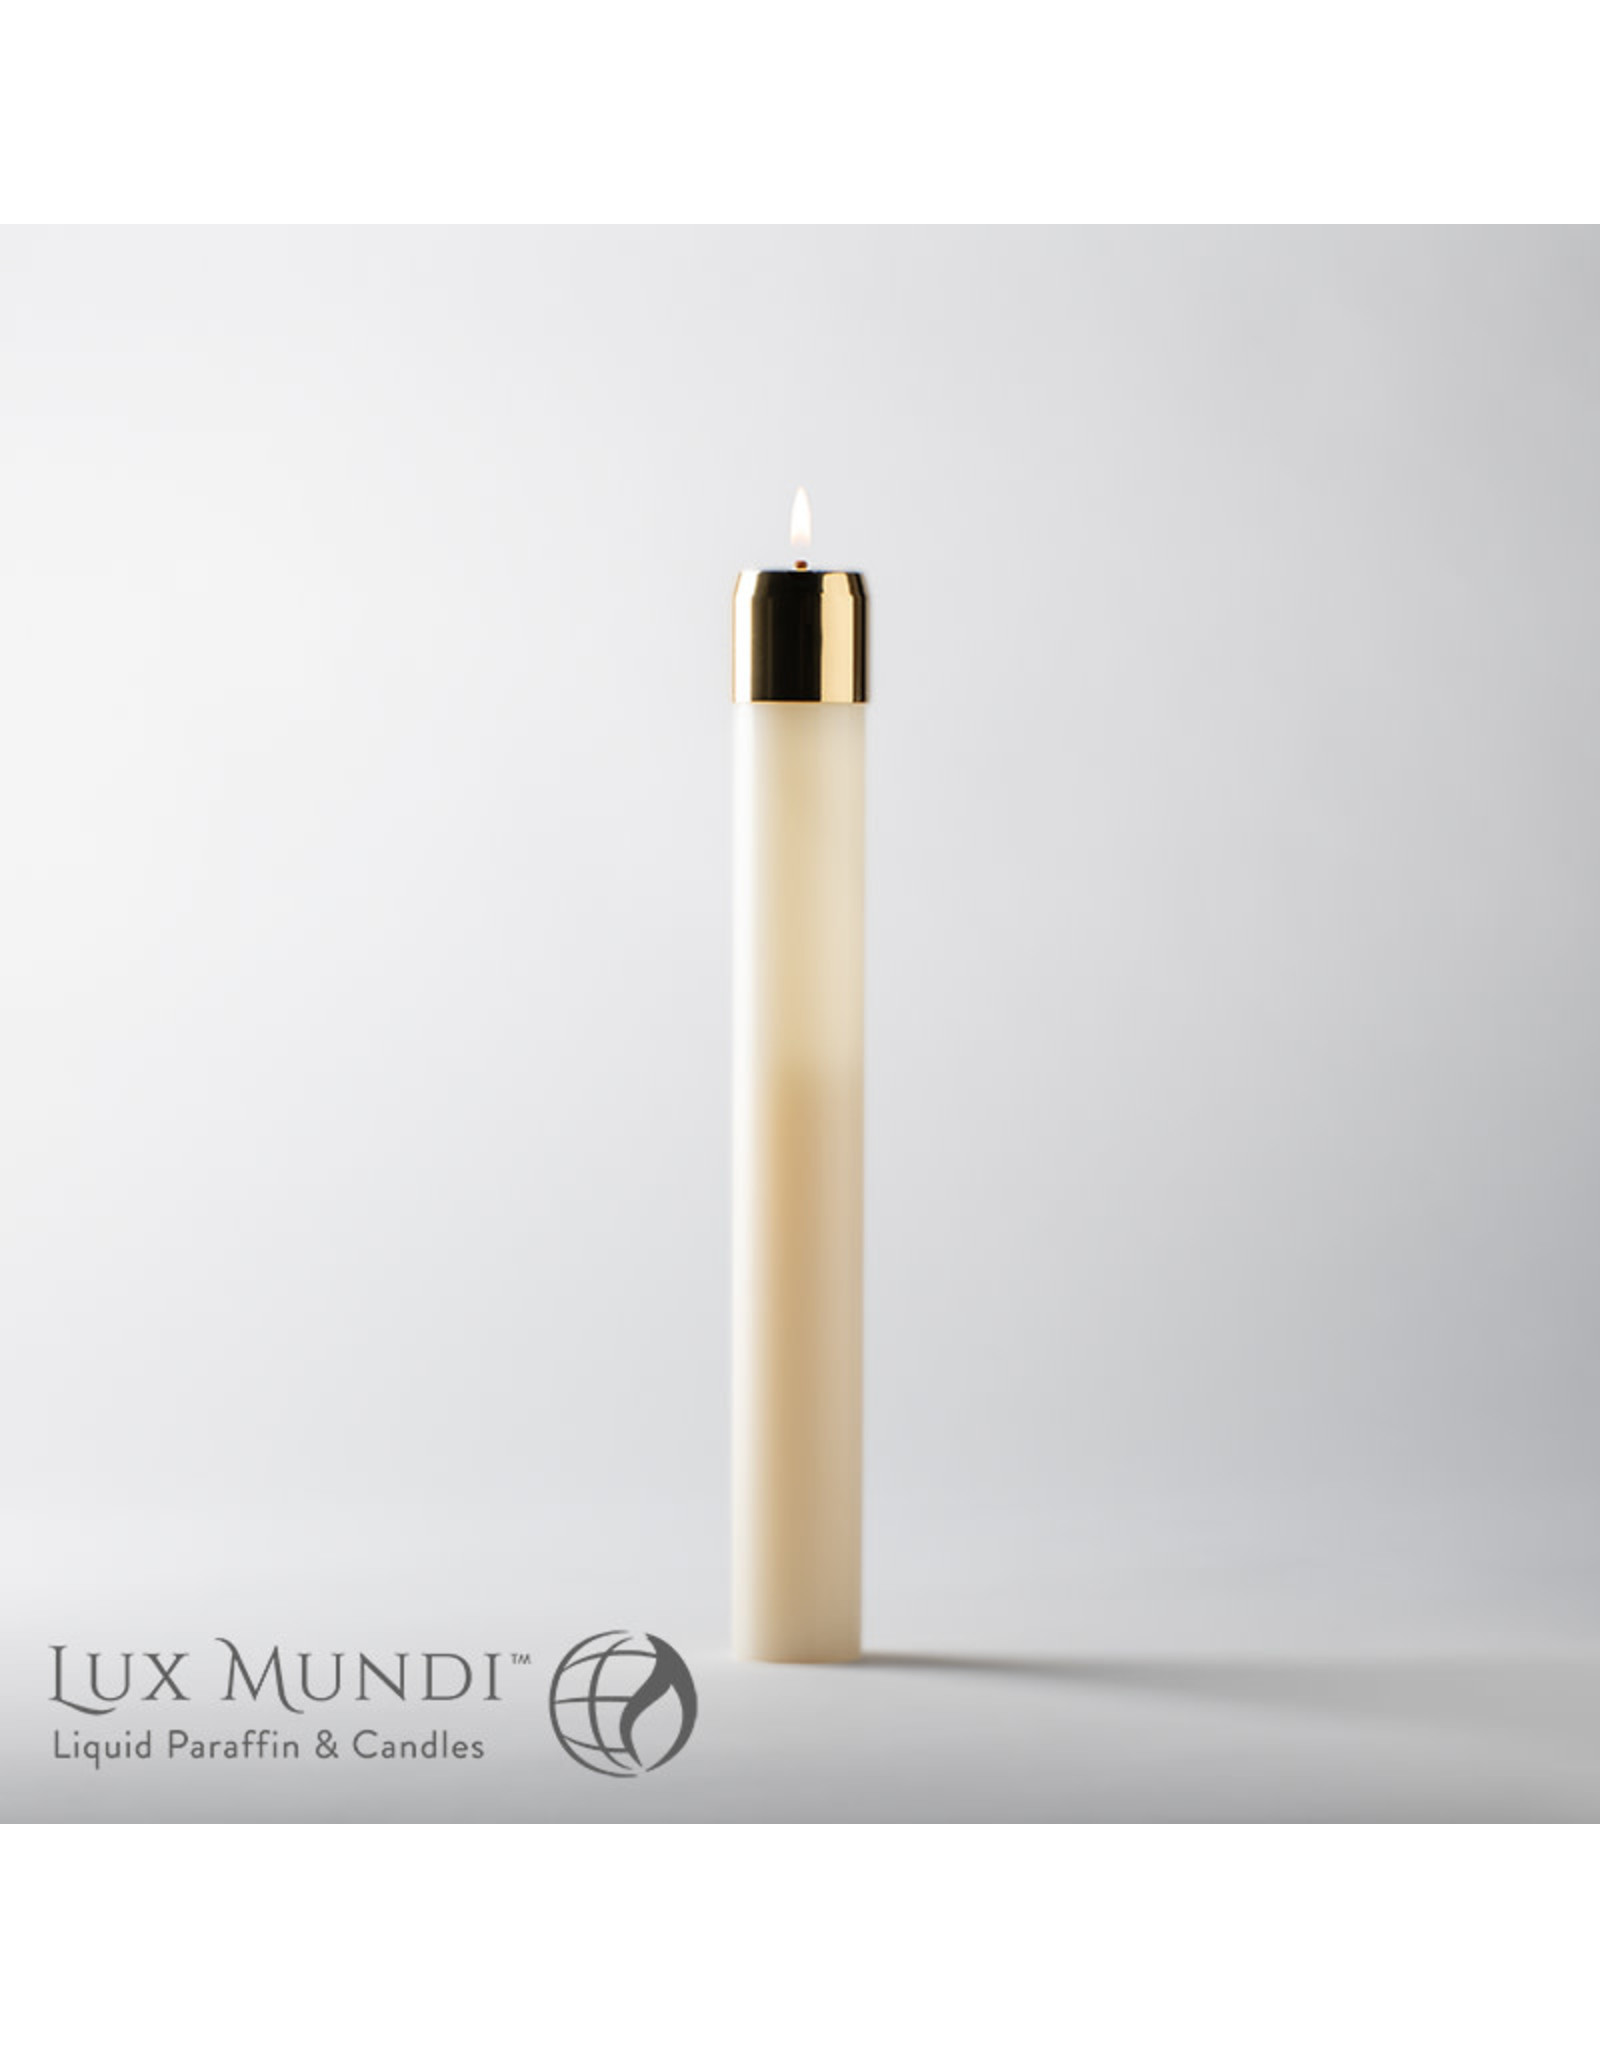 Lux Mundi Refillable Oil Altar Candle 1.5"x12"